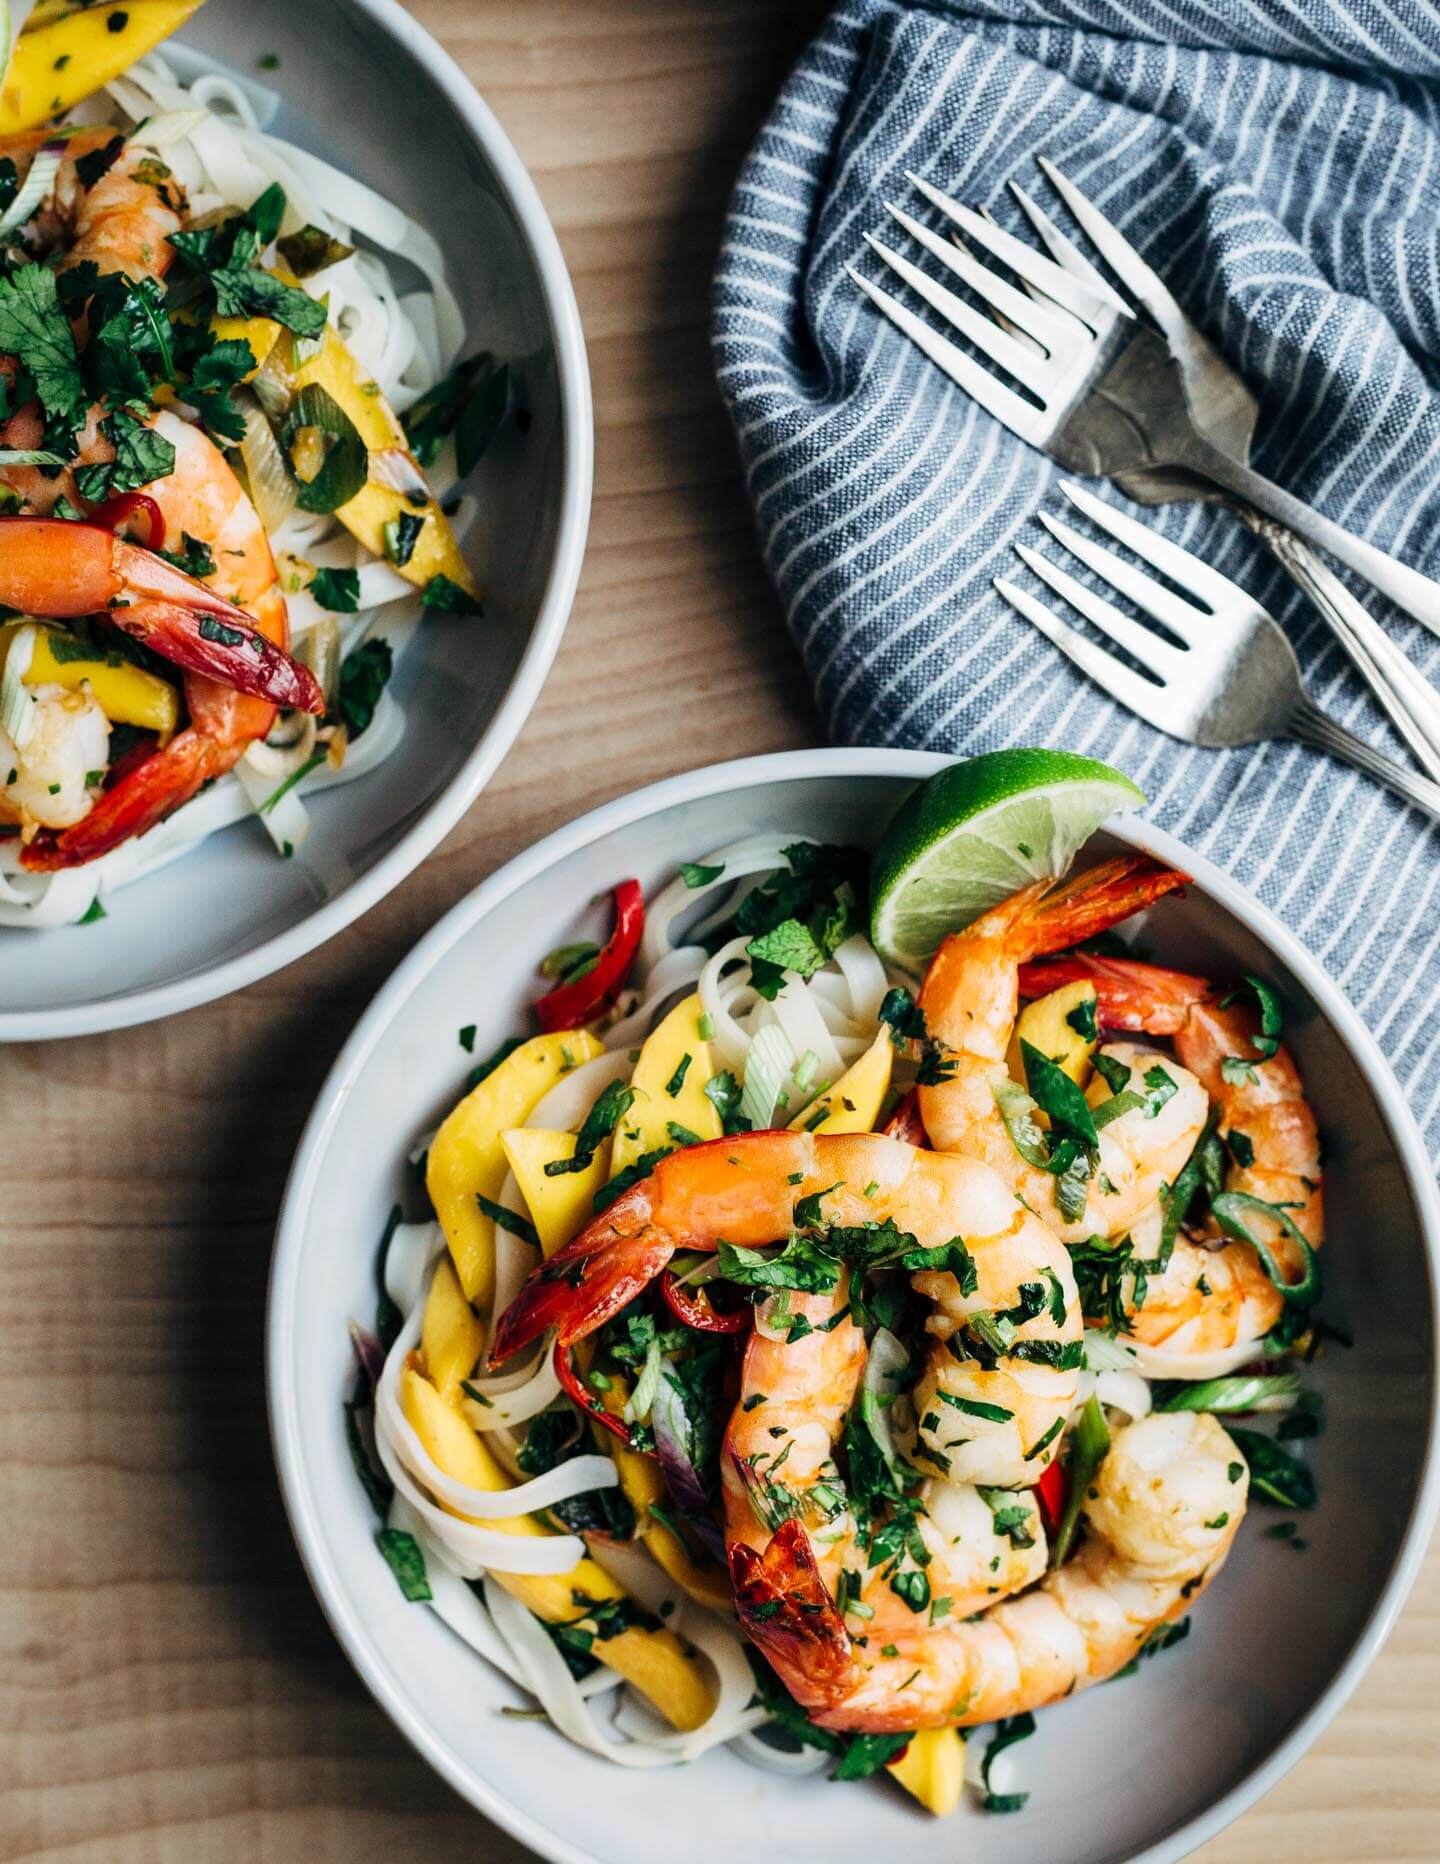 Mango shrimp is perfect for busy nights. Fresh sliced mango and shrimp seared in coconut oil tossed with chilis, herbs, rice noodles, and a simple lime sauce makes for a nearly effortless, crazy flavorful weeknight meal.